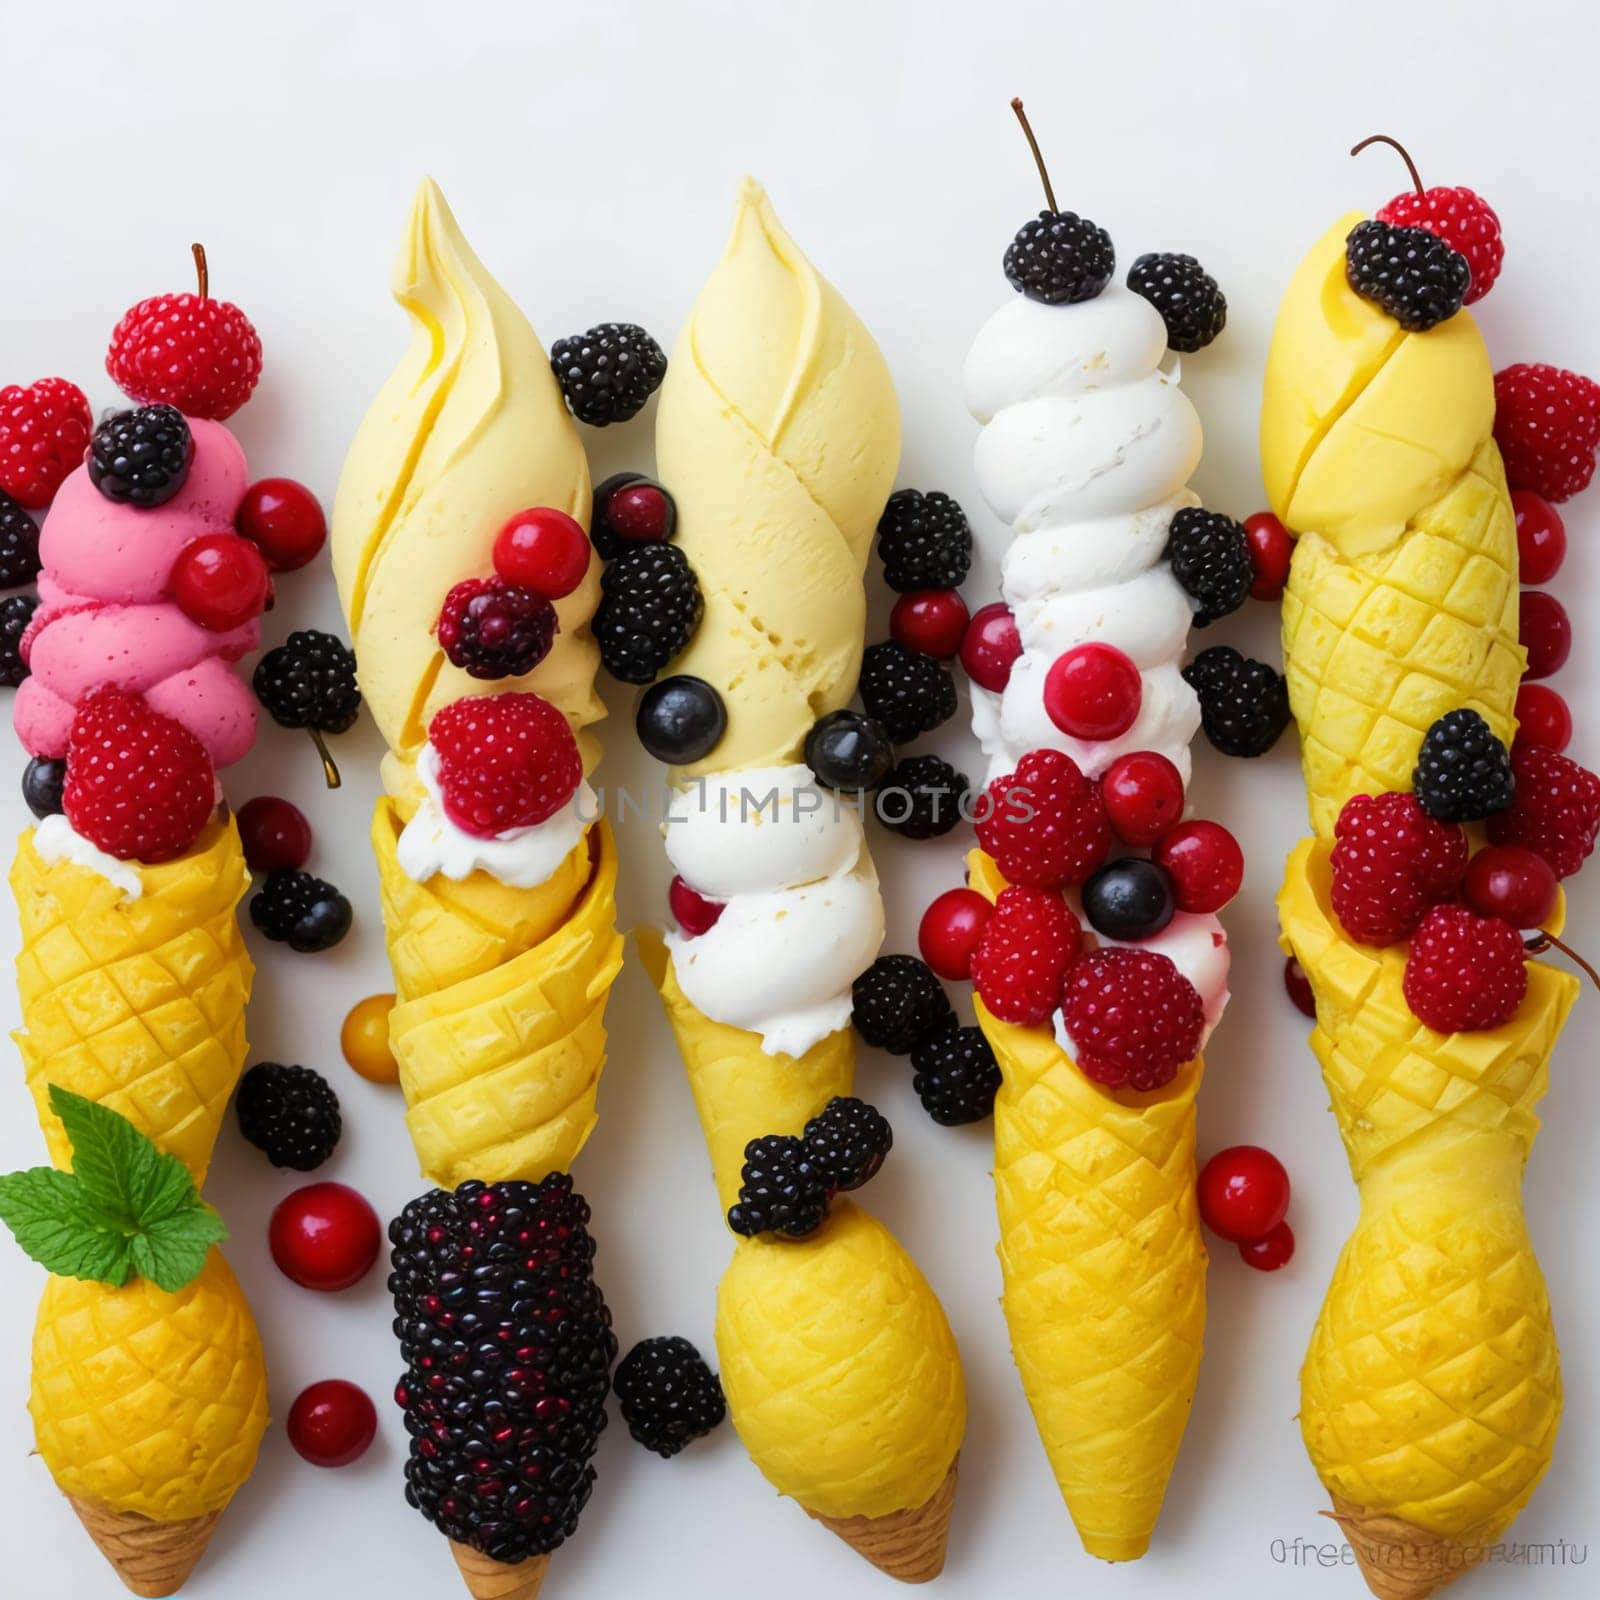 ice cream cones with frozen mango, pineapple, red and black currant berries on a white-gray background by Севостьянов